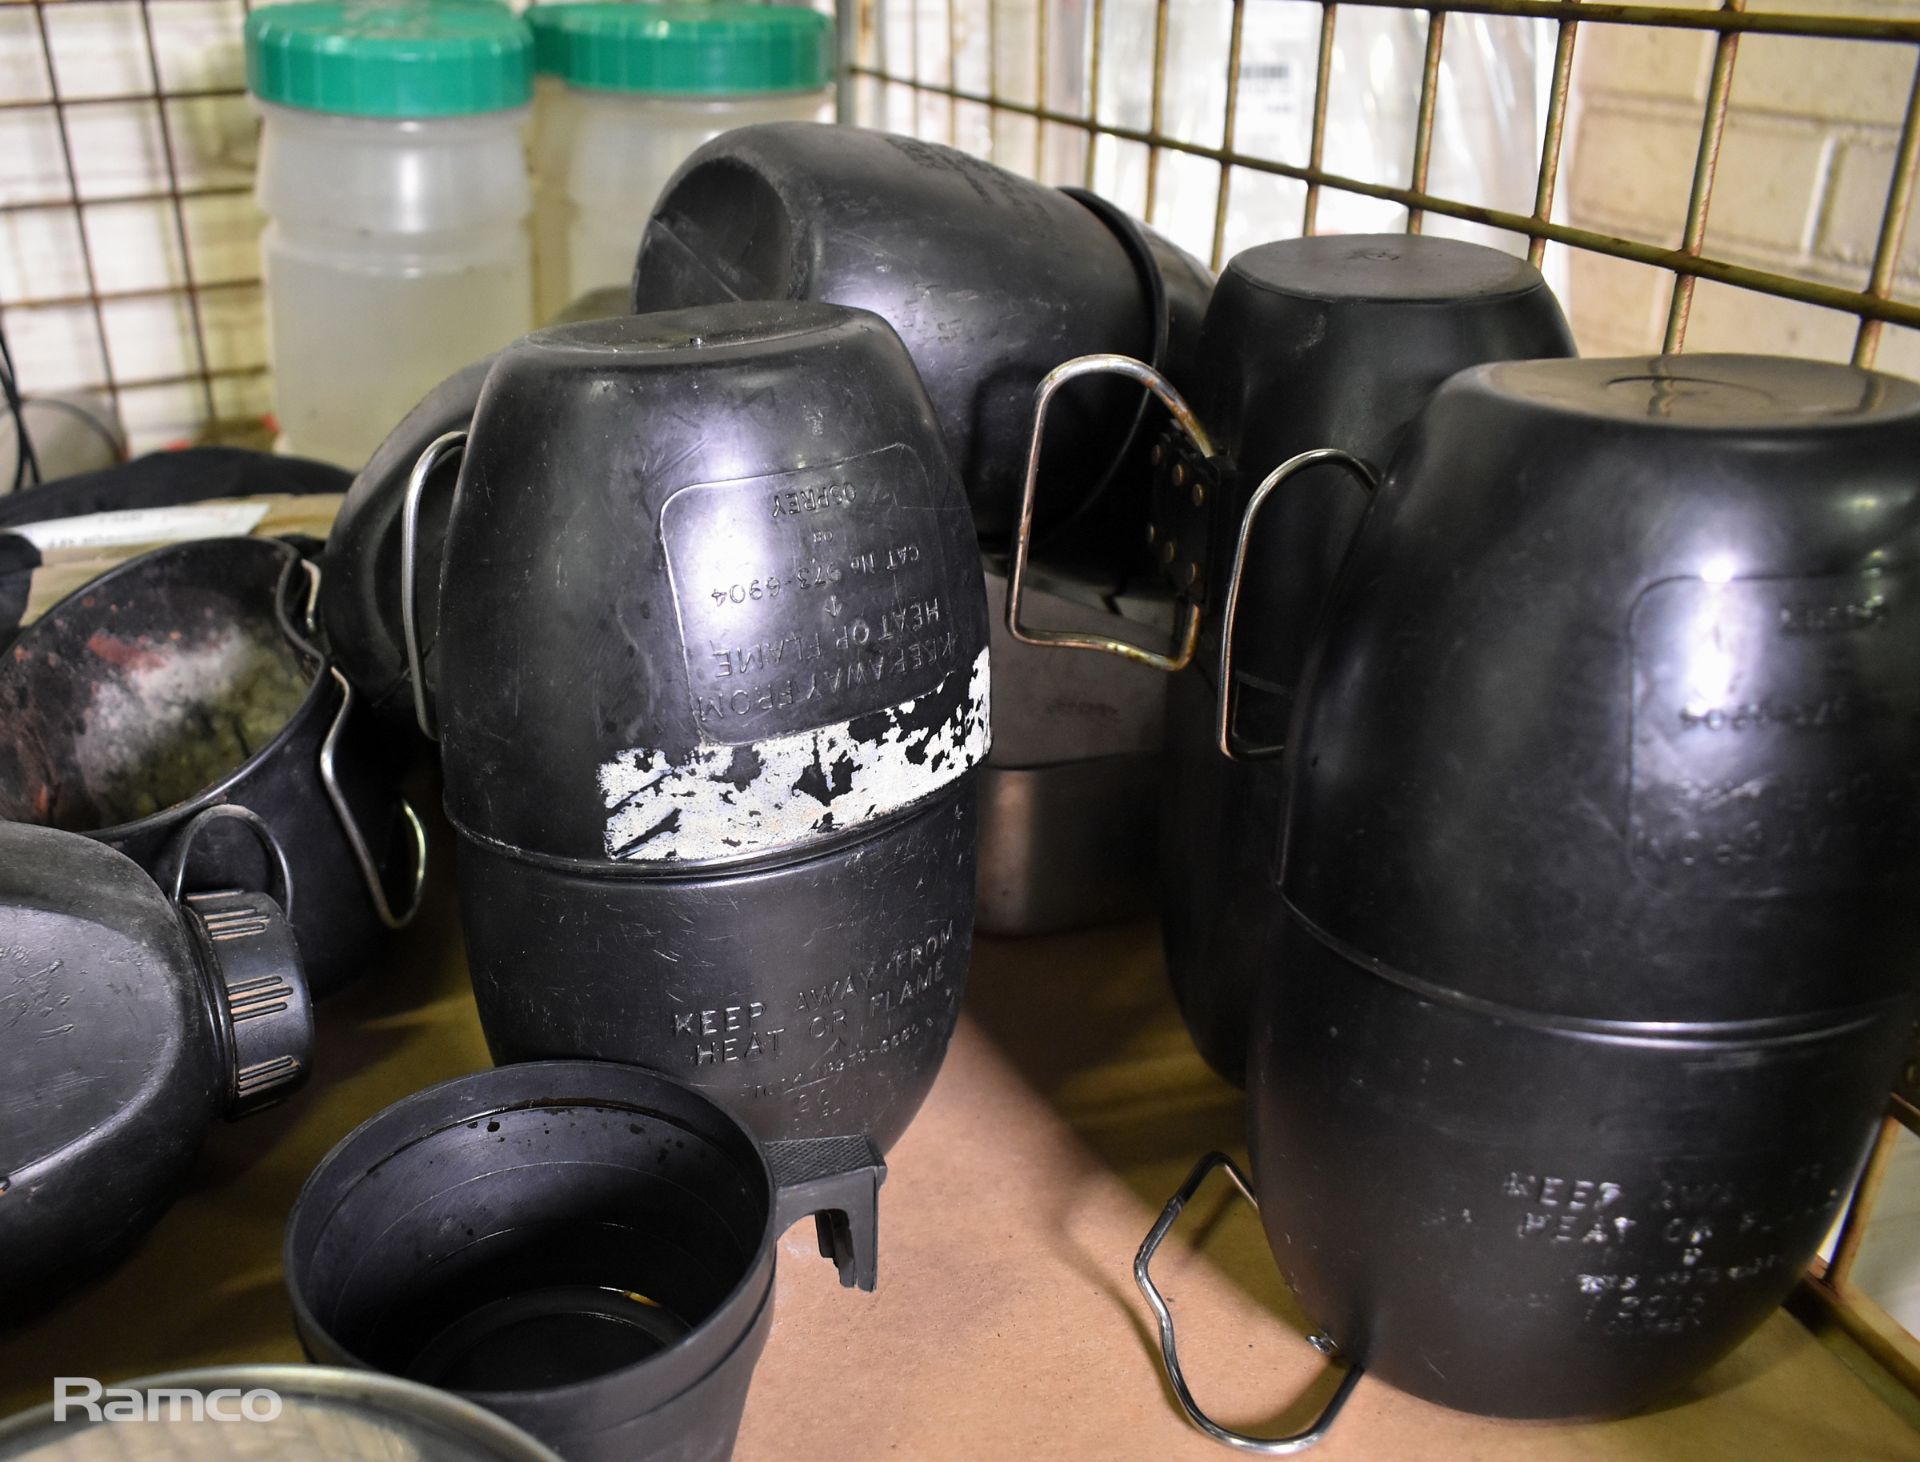 Camping accessories - Norwegian food containers, stainless steel flasks, cooking pots - Image 6 of 7